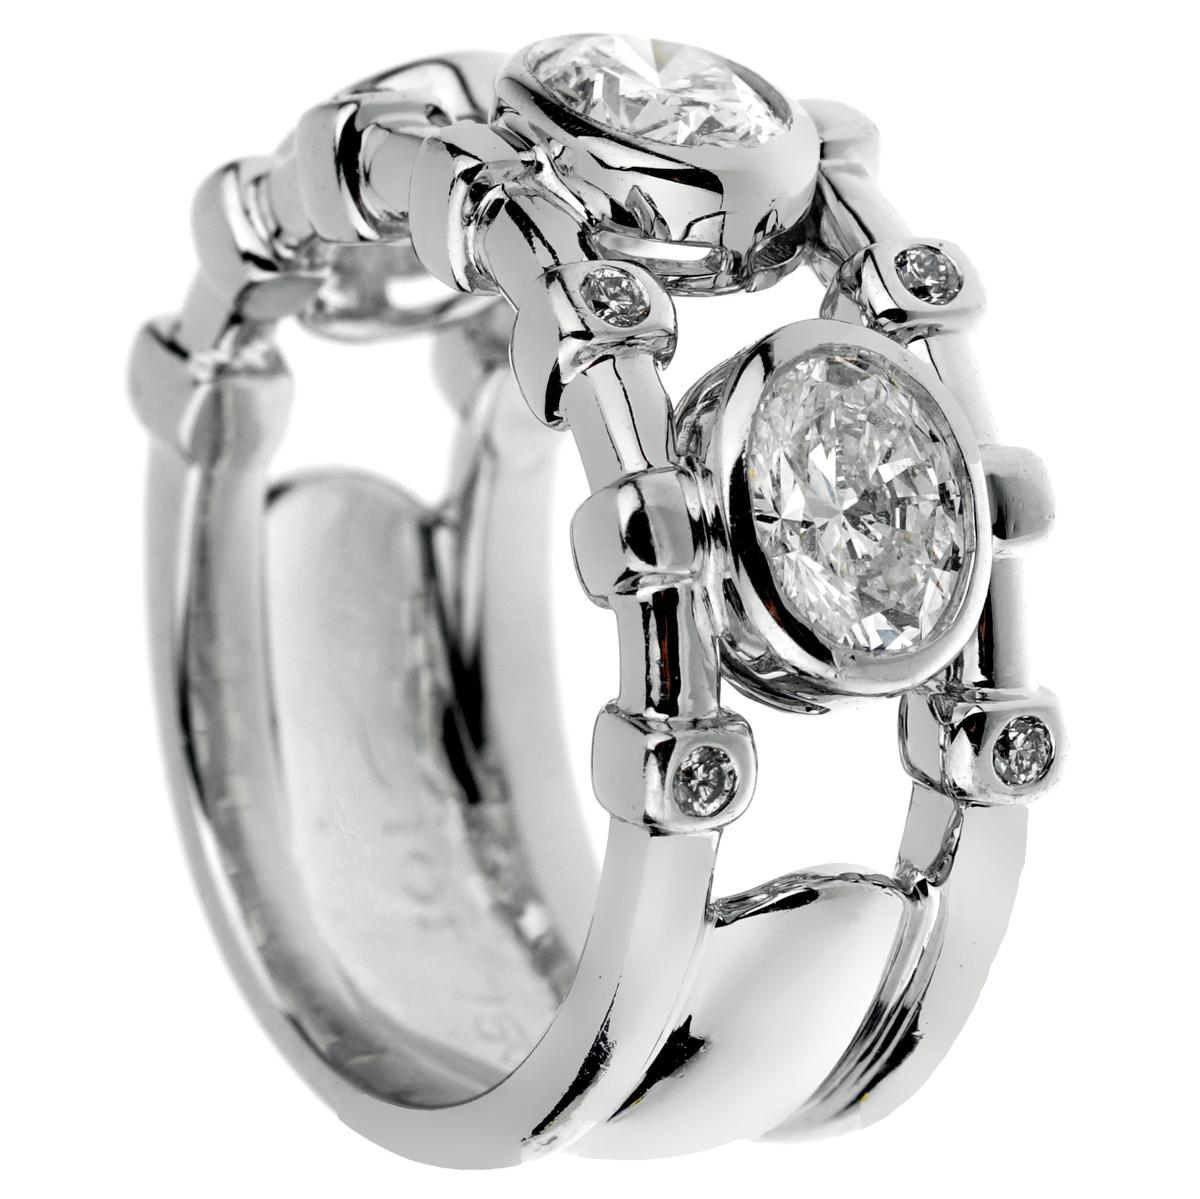 An amazing Christian Dior diamond cocktail ring showcasing 3 large round oval diamonds adorned with 8 round brilliant cut diamonds in shimmering 18k white gold. 

The ring measures a size 5 3/4 and can be resized.
Diamond Weight 1.56ct
